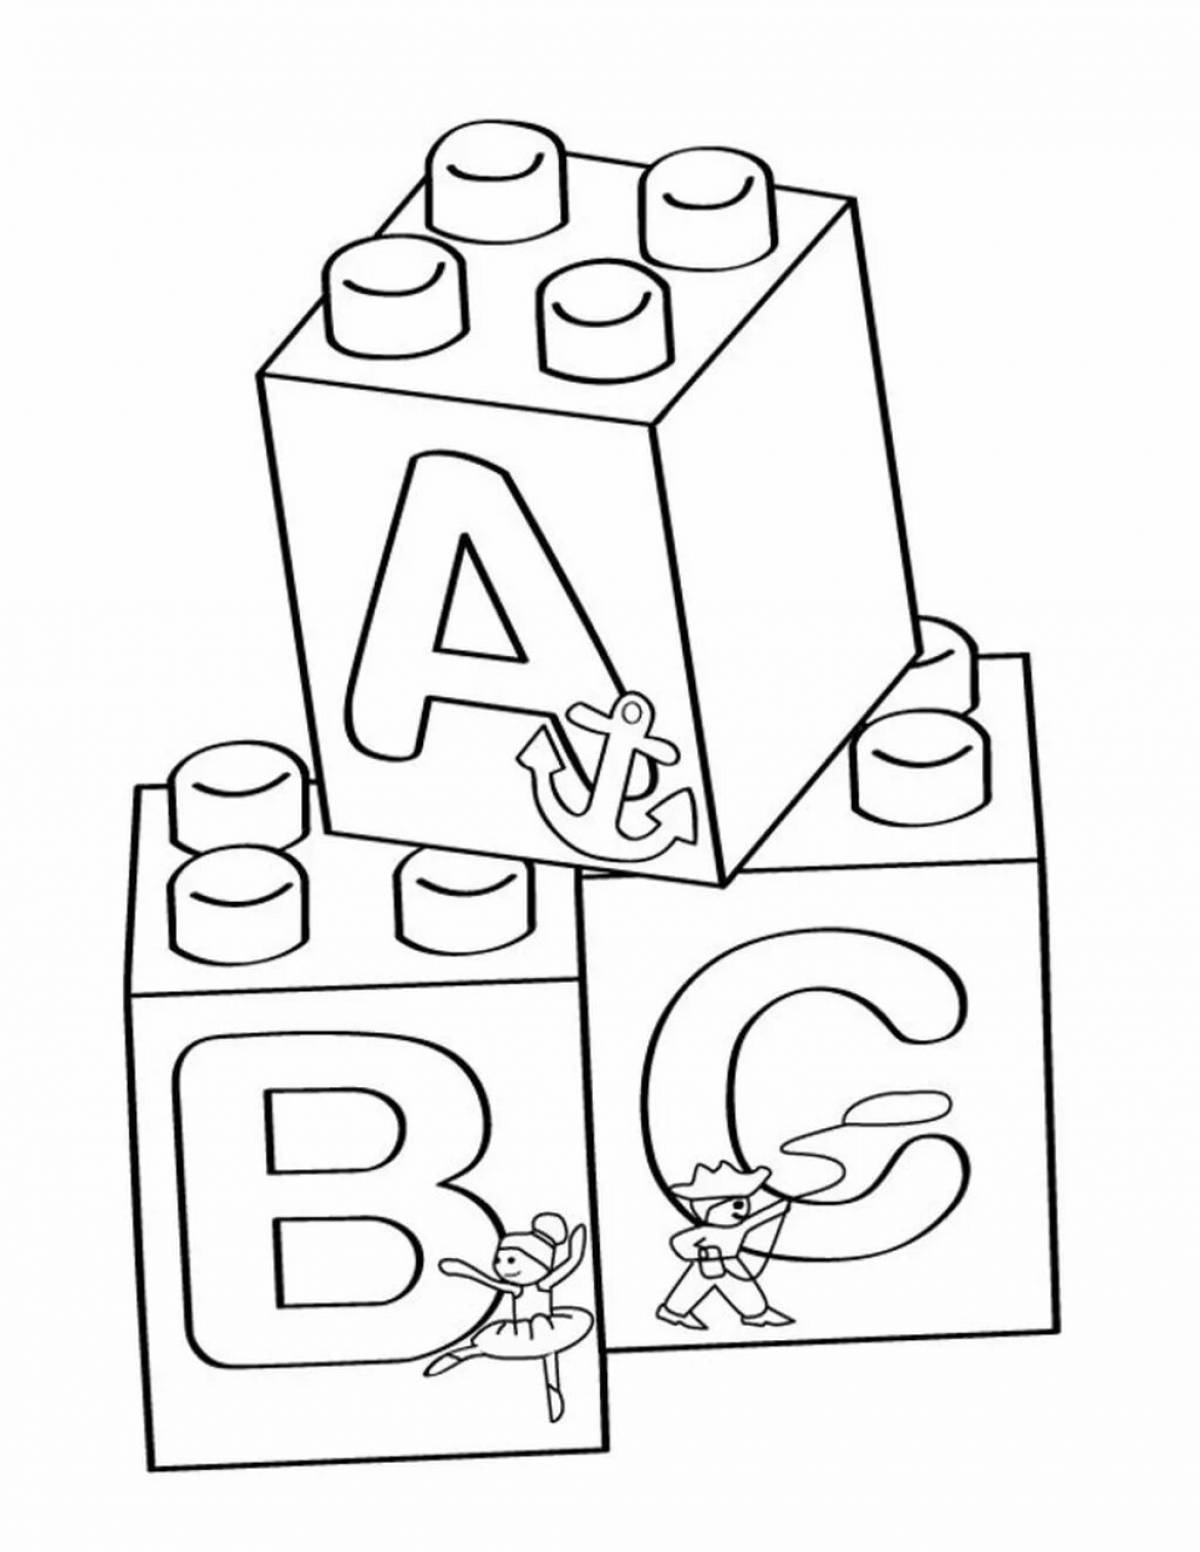 Abc for kids #16